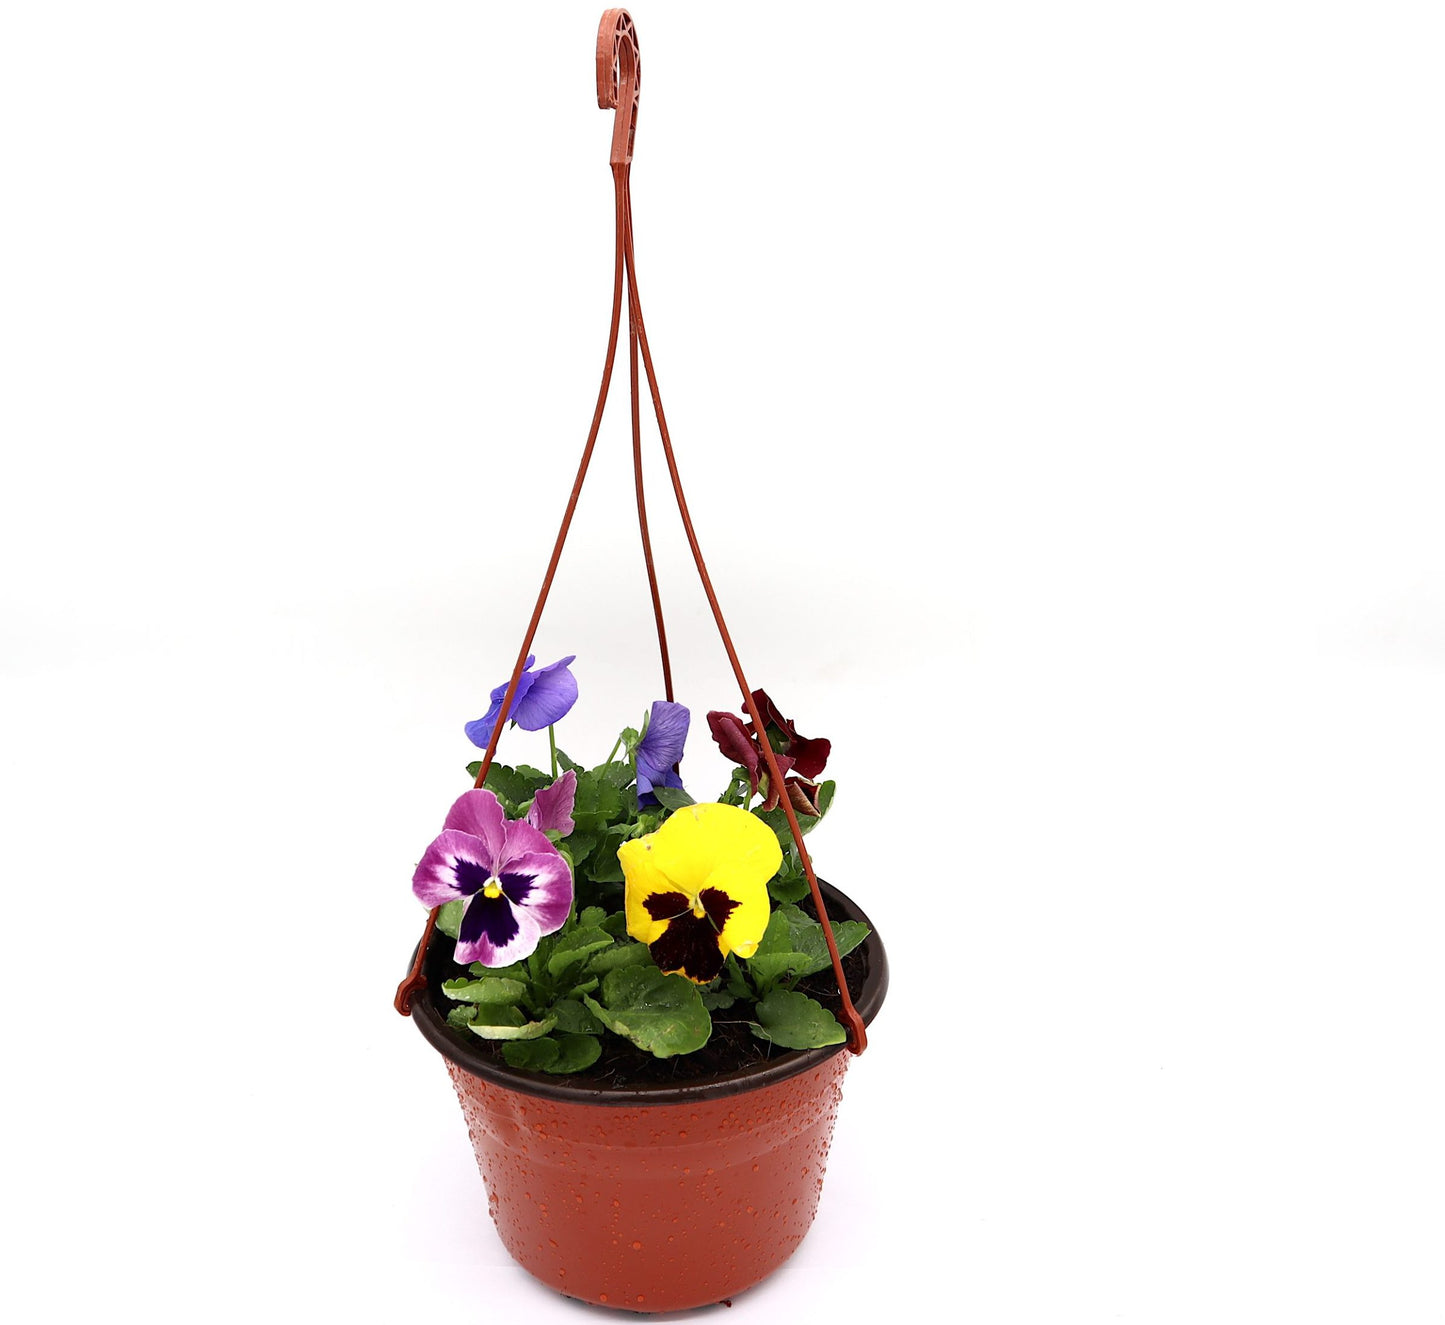 Pansy "Hanging" Mix flowers